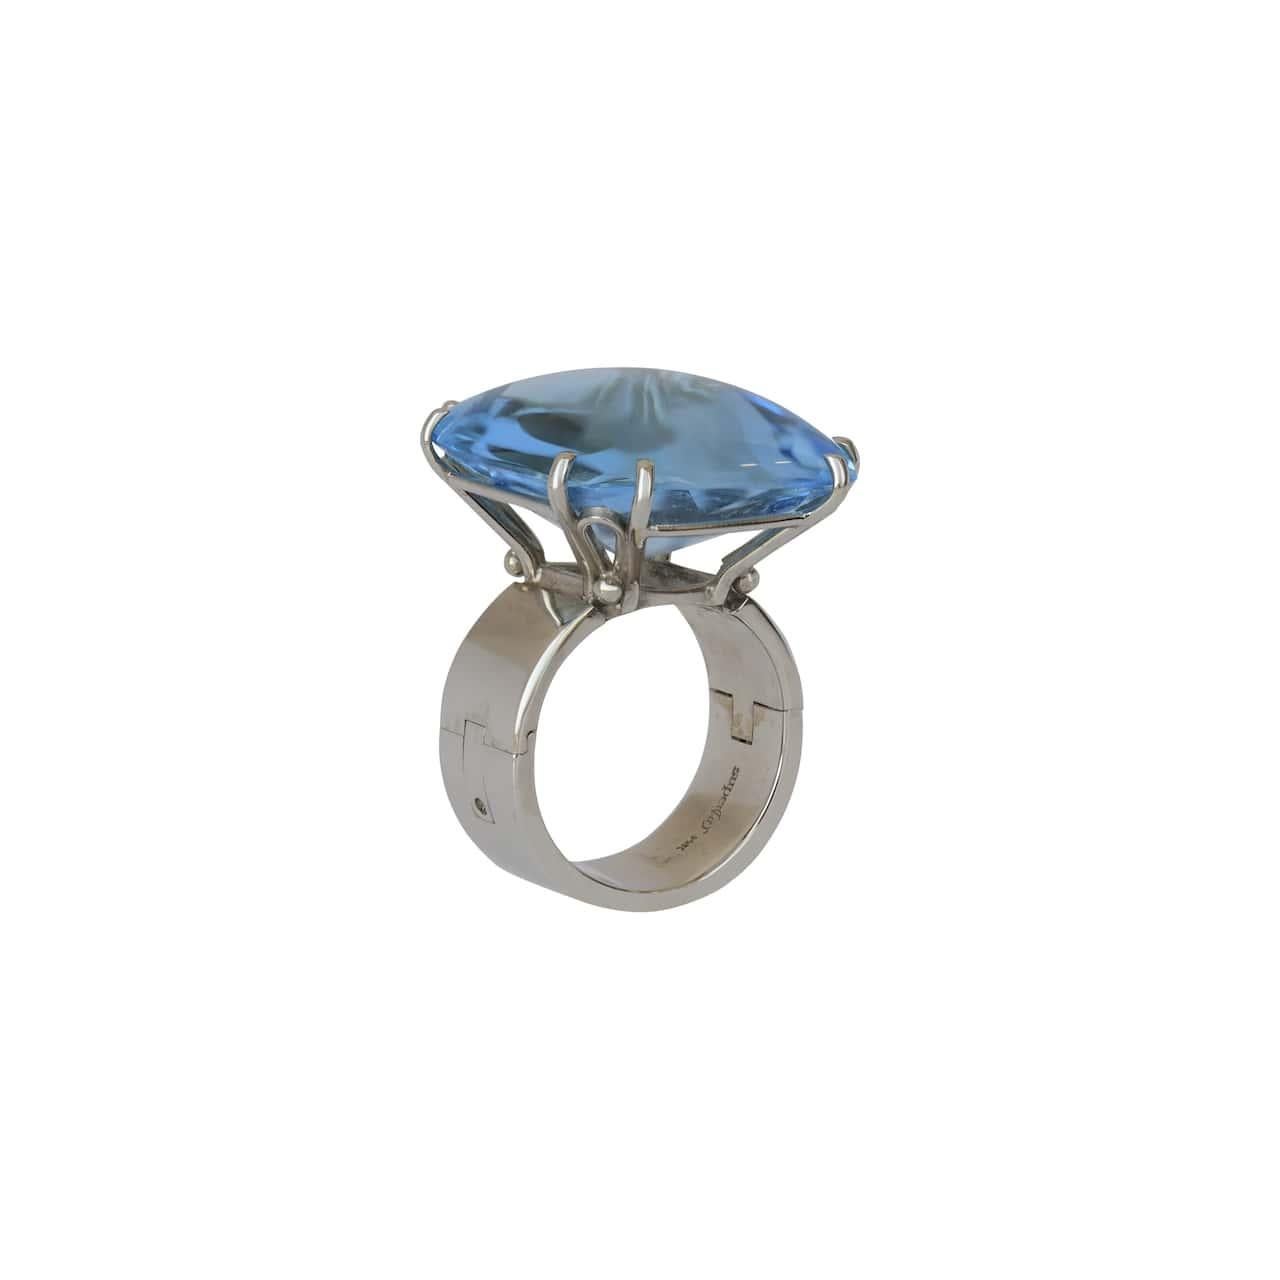 This bold and eye-catching ring by SuperFit features a square cabochon blue topaz with a faceted bottom, elegantly secured by 8 prongs and set in lustrous 14K white gold. The blue topaz itself is an impressive 1 inch by 1 inch in size, boasting a